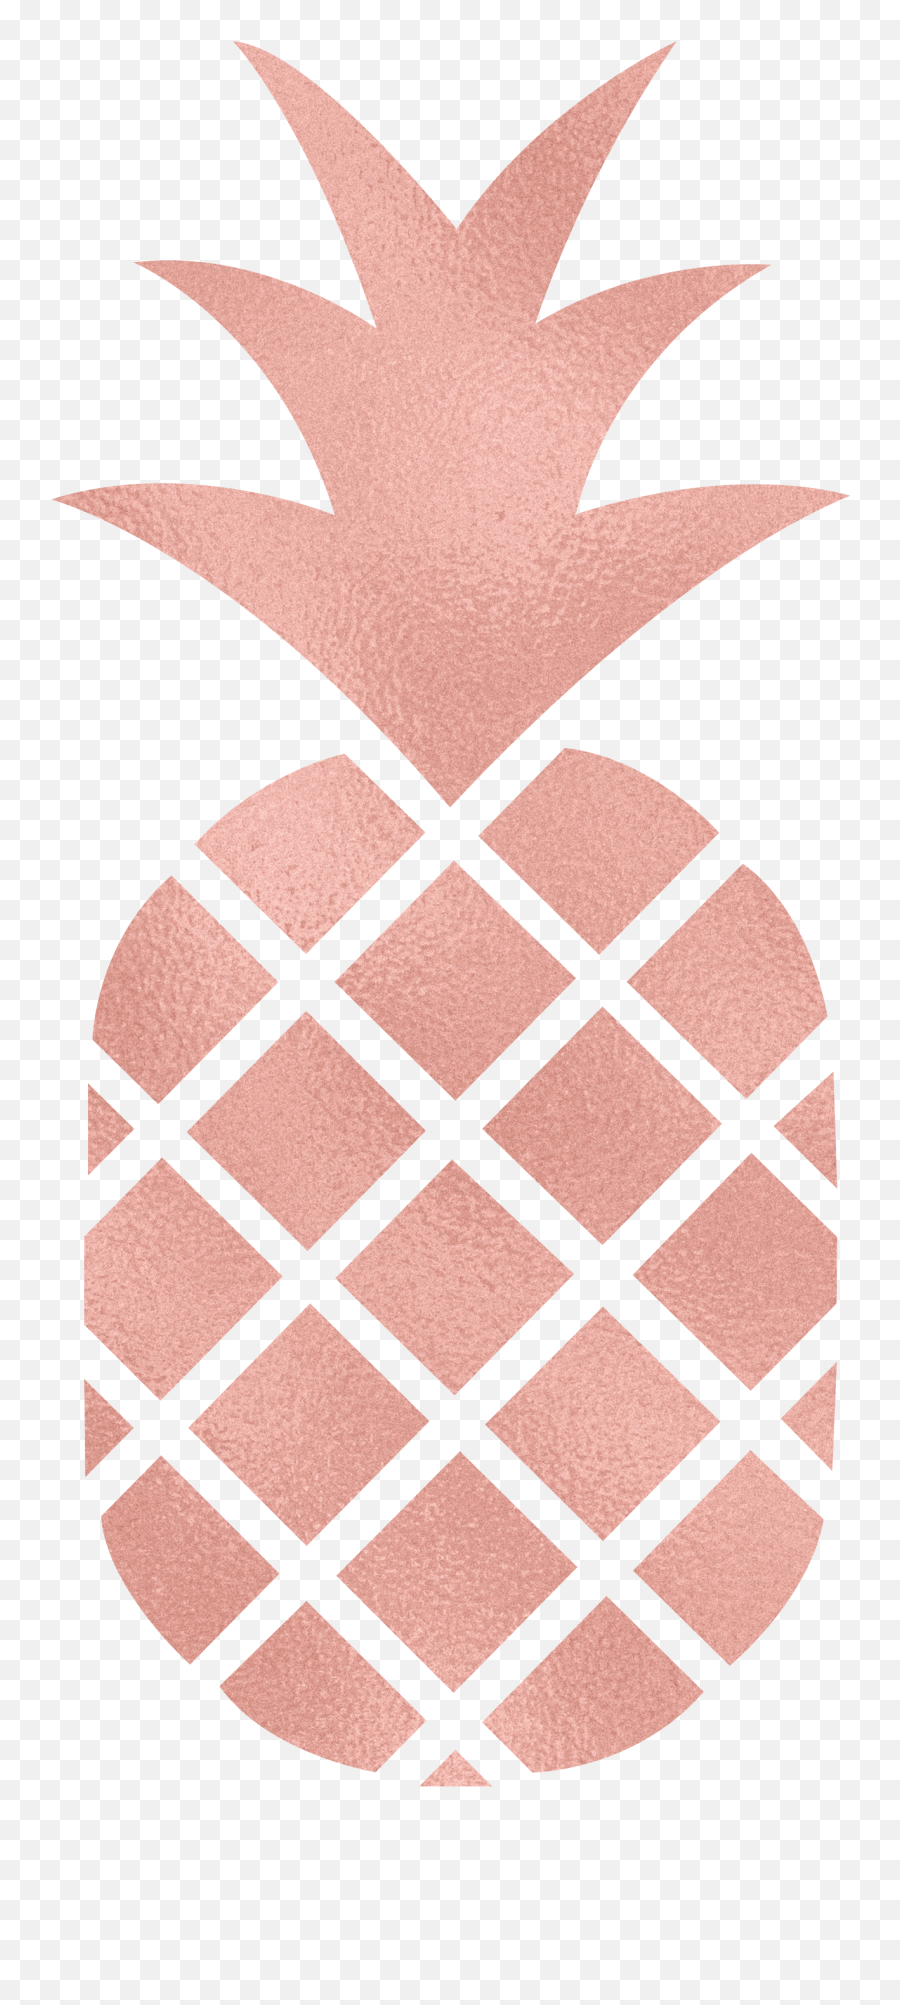 Rose Gold Pineapple - Rose Gold Pineapple Png,Pineapple Transparent